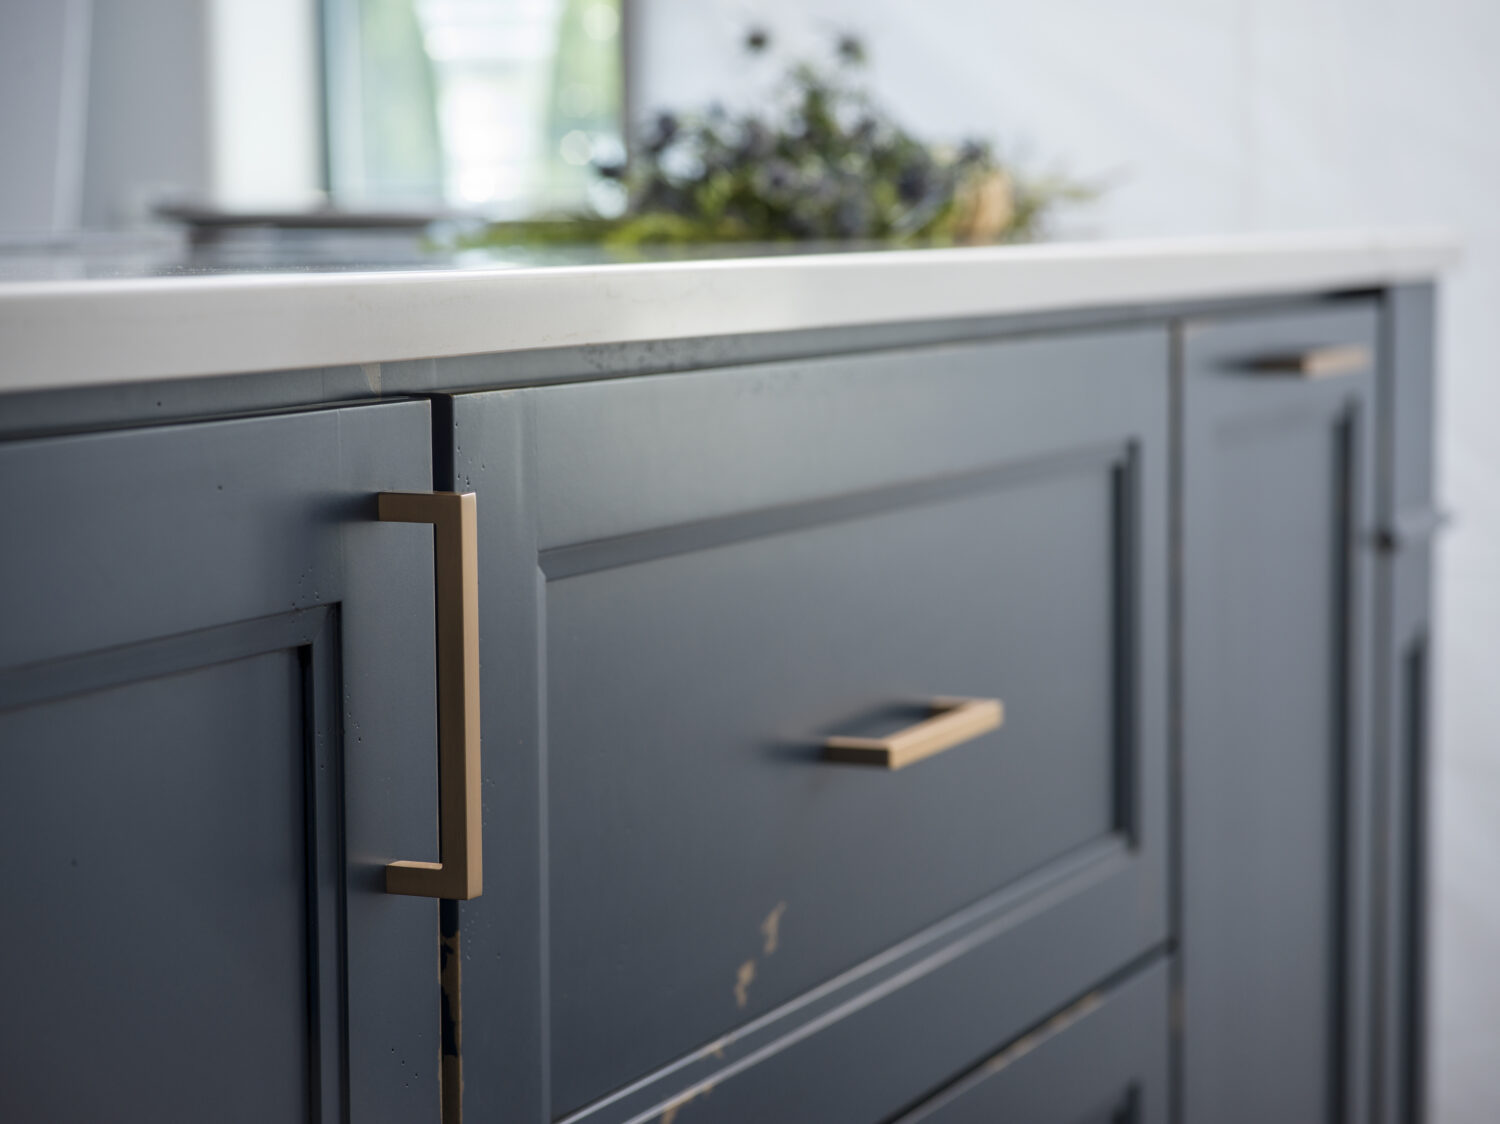 A close up of a distressed painted finish on kitchen cabinets with a dark navy blue color and brass hardware.